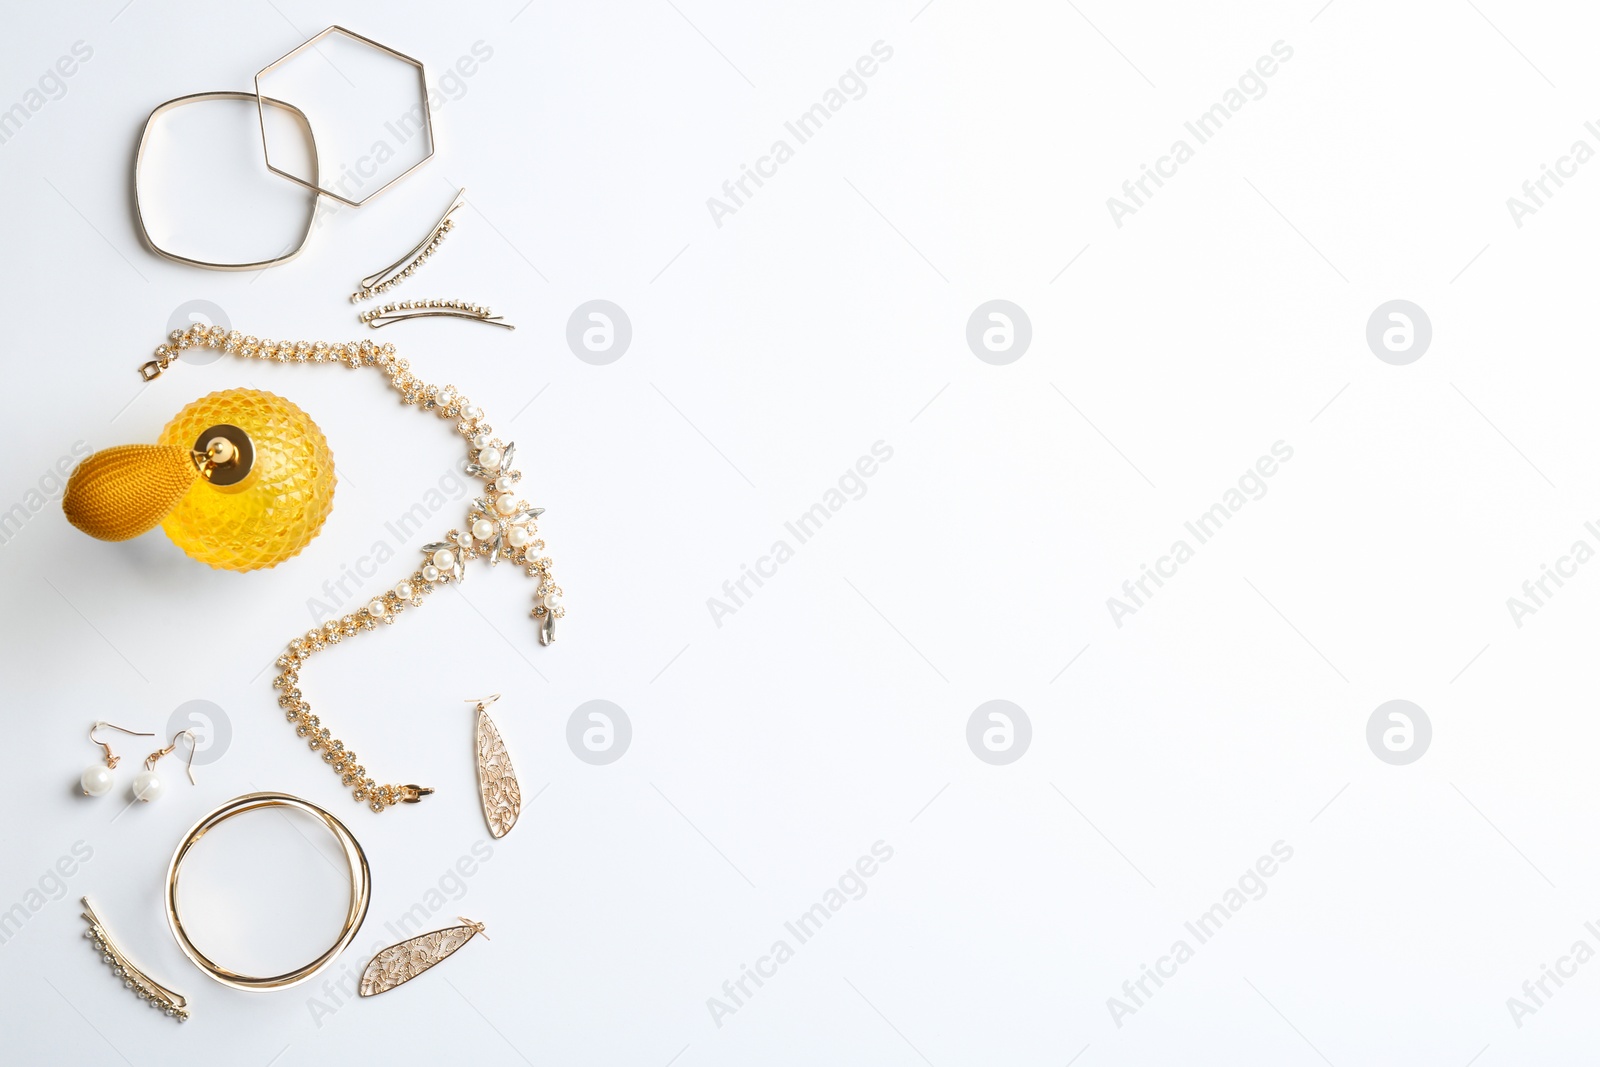 Photo of Composition with perfume bottle and jewellery on white background, top view